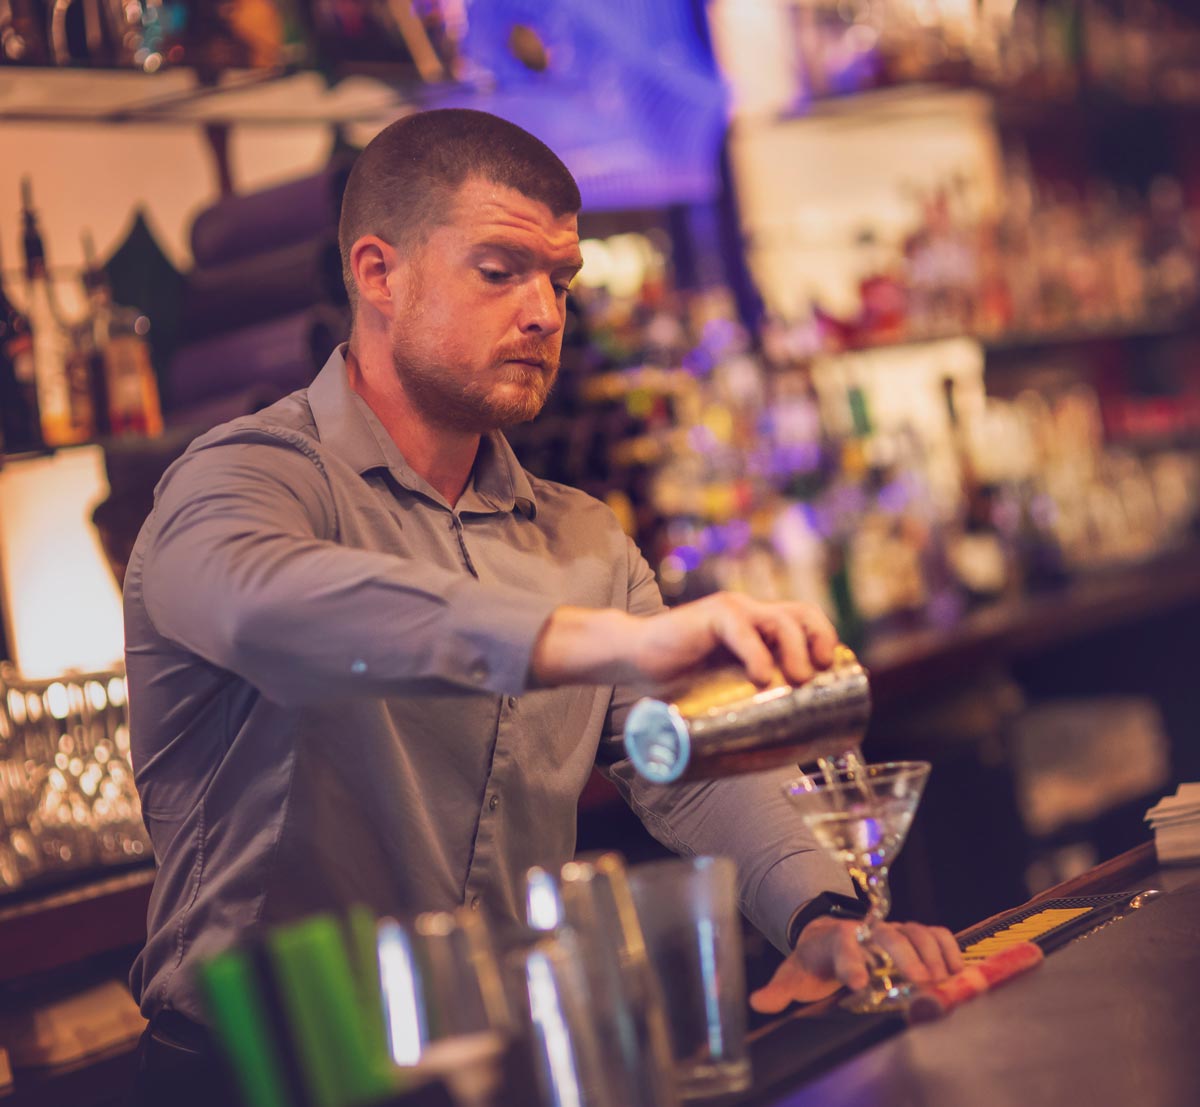 Bartender pouring out a drink into martini glass